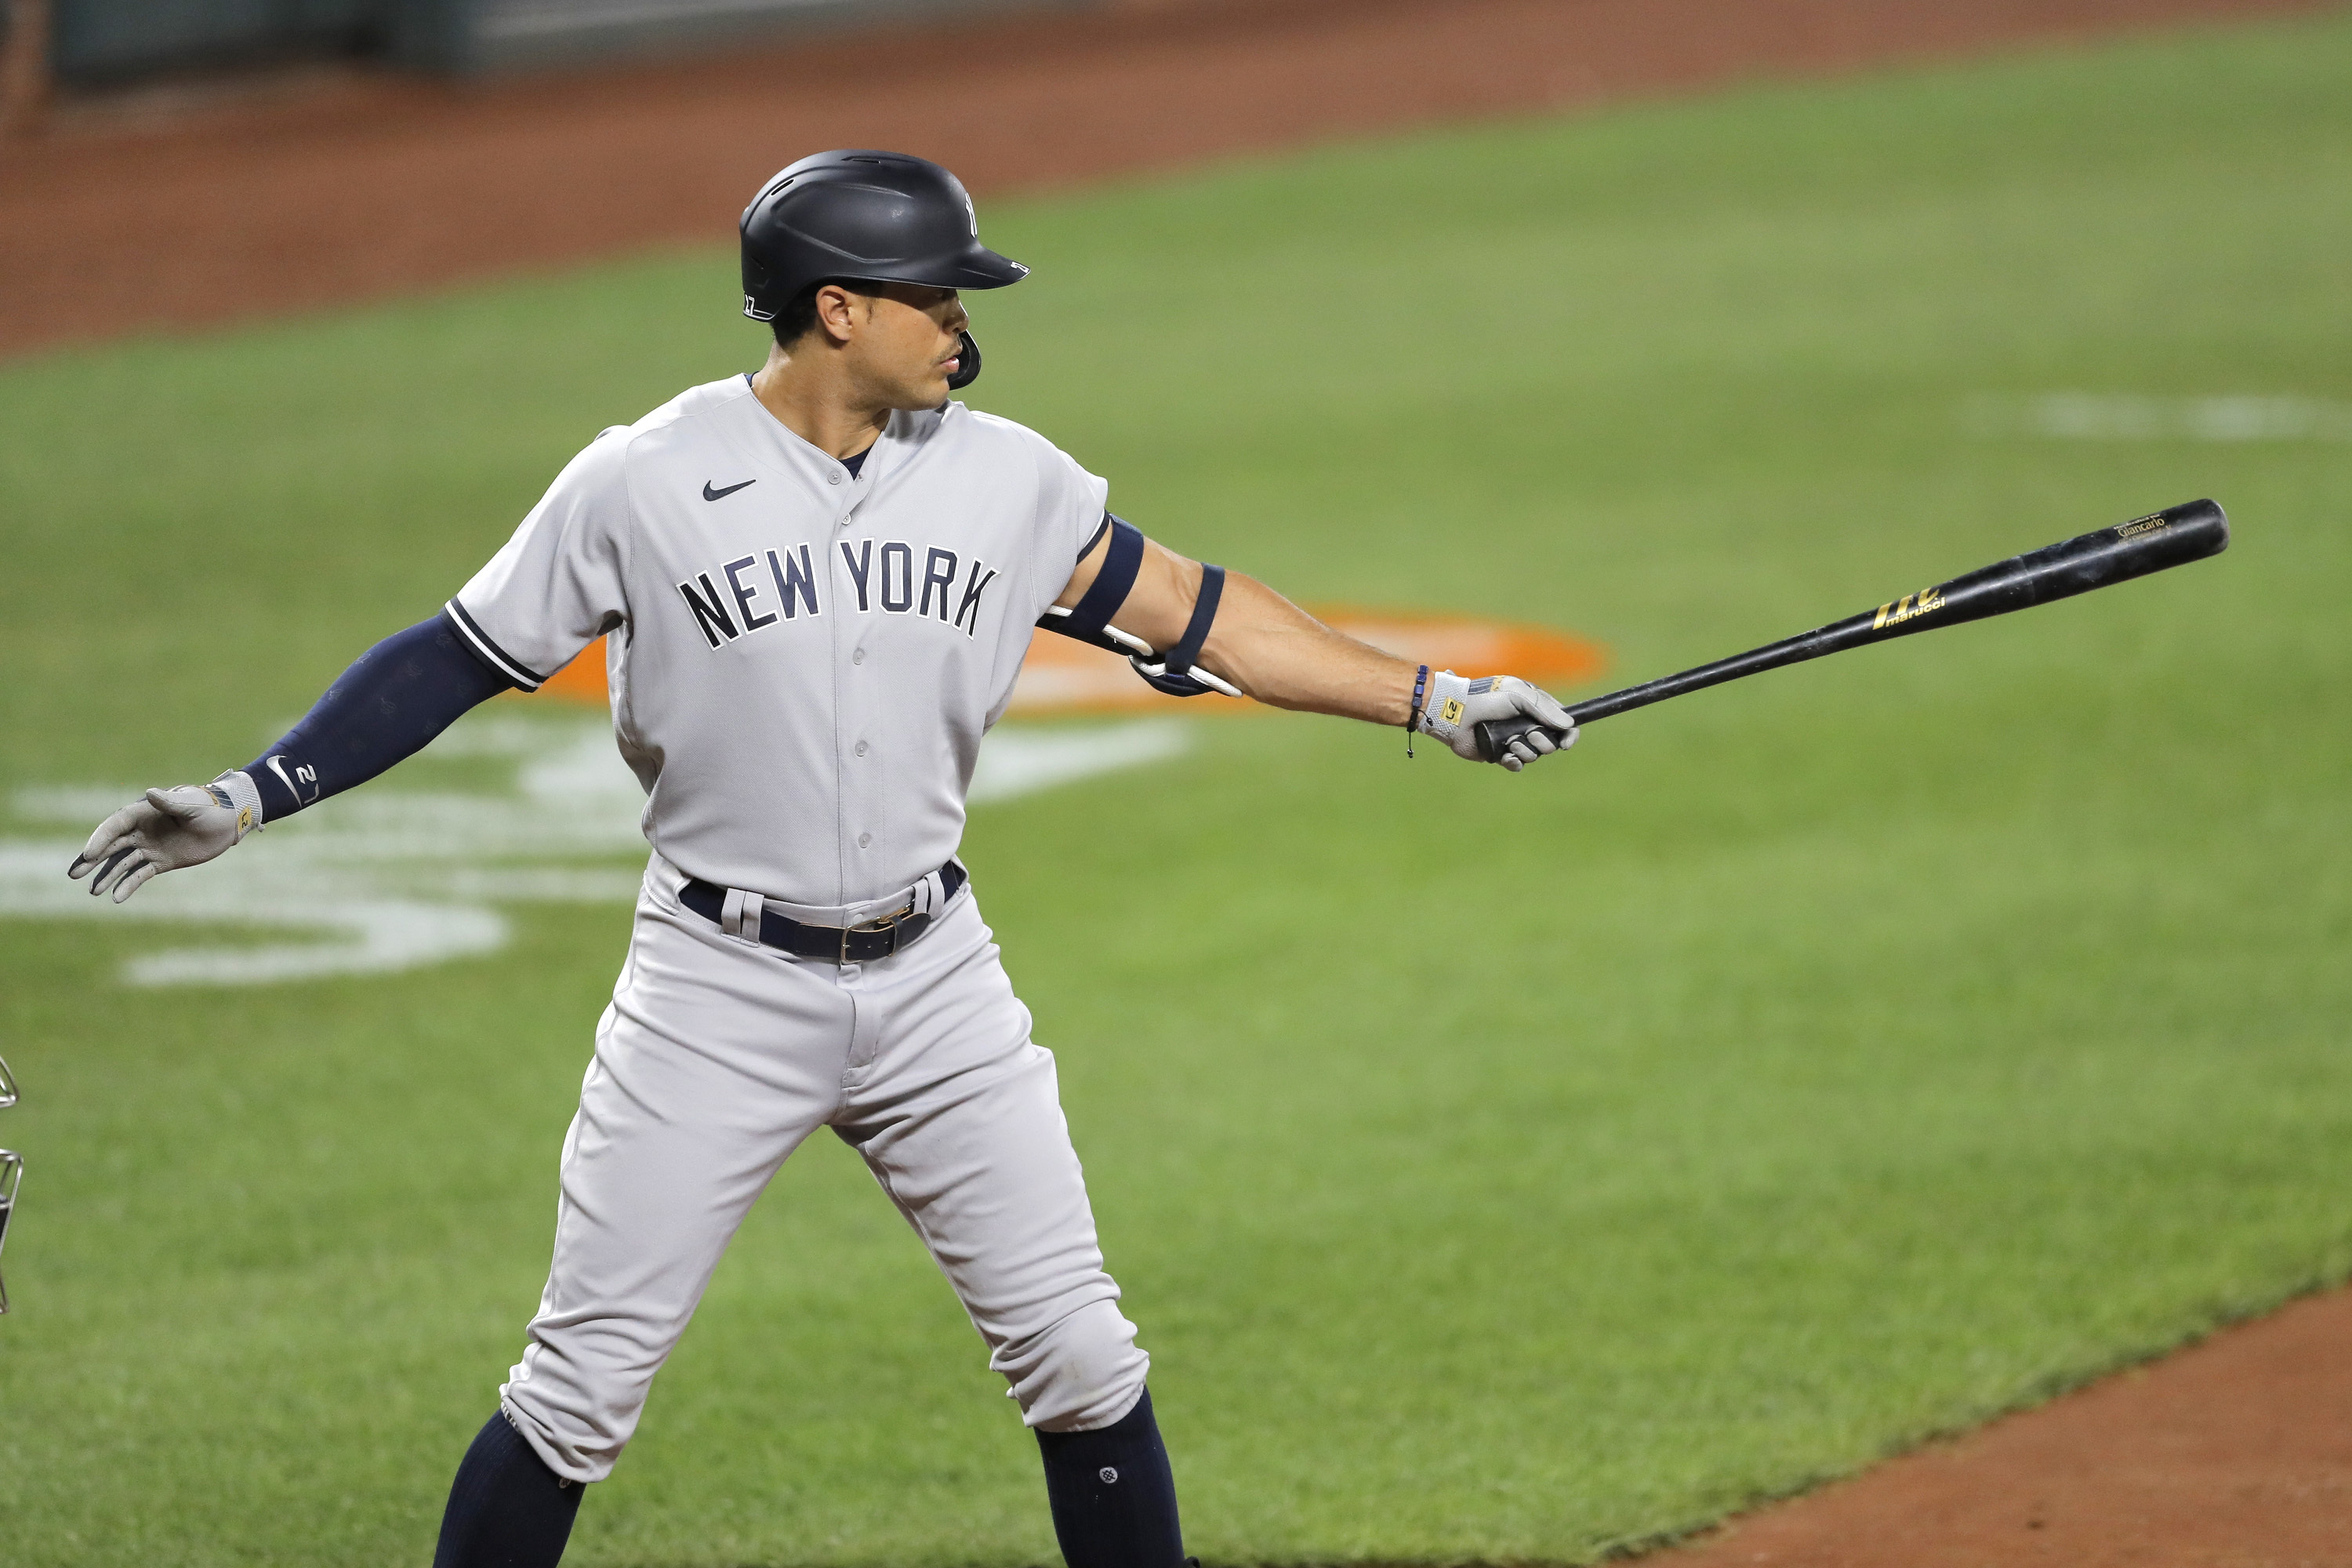 Yankees' Giancarlo Stanton out 6 weeks with strained hamstring